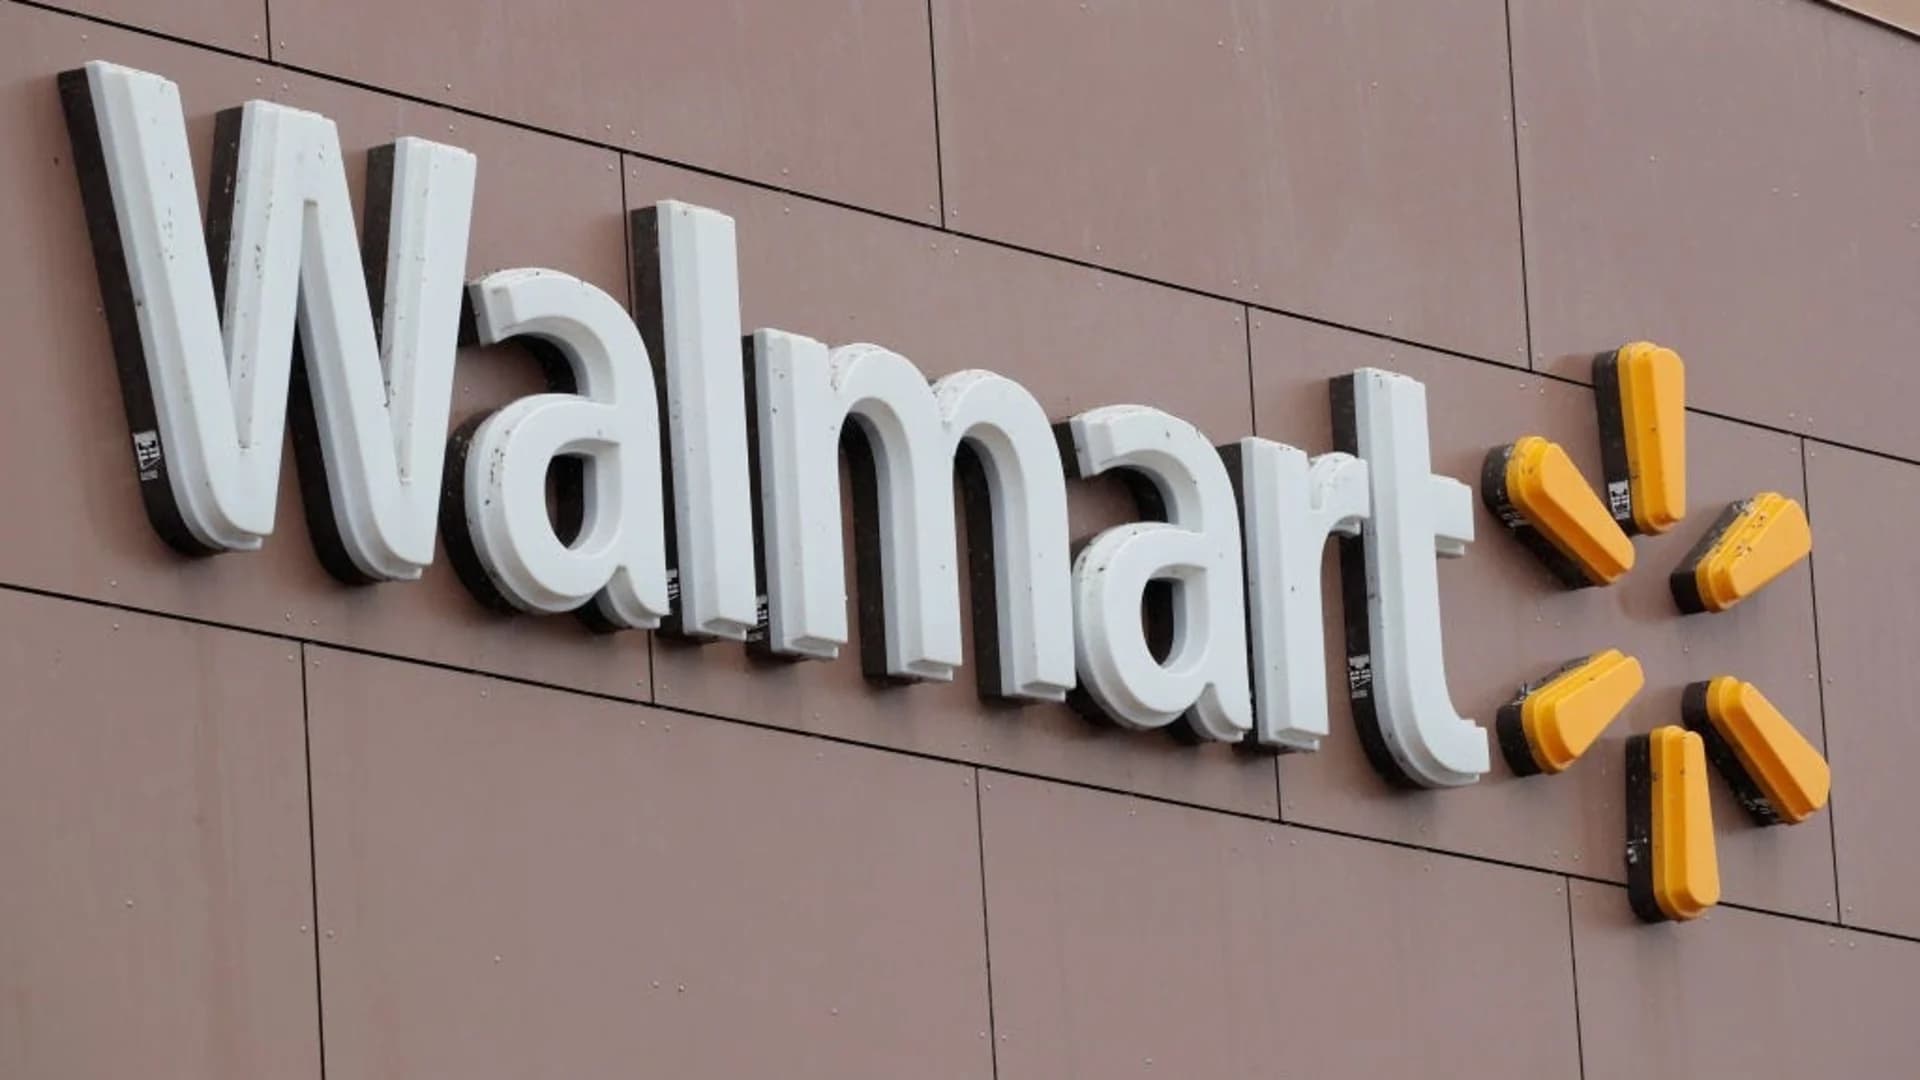 Walmart sets age of 21 to buy firearms, ammunition